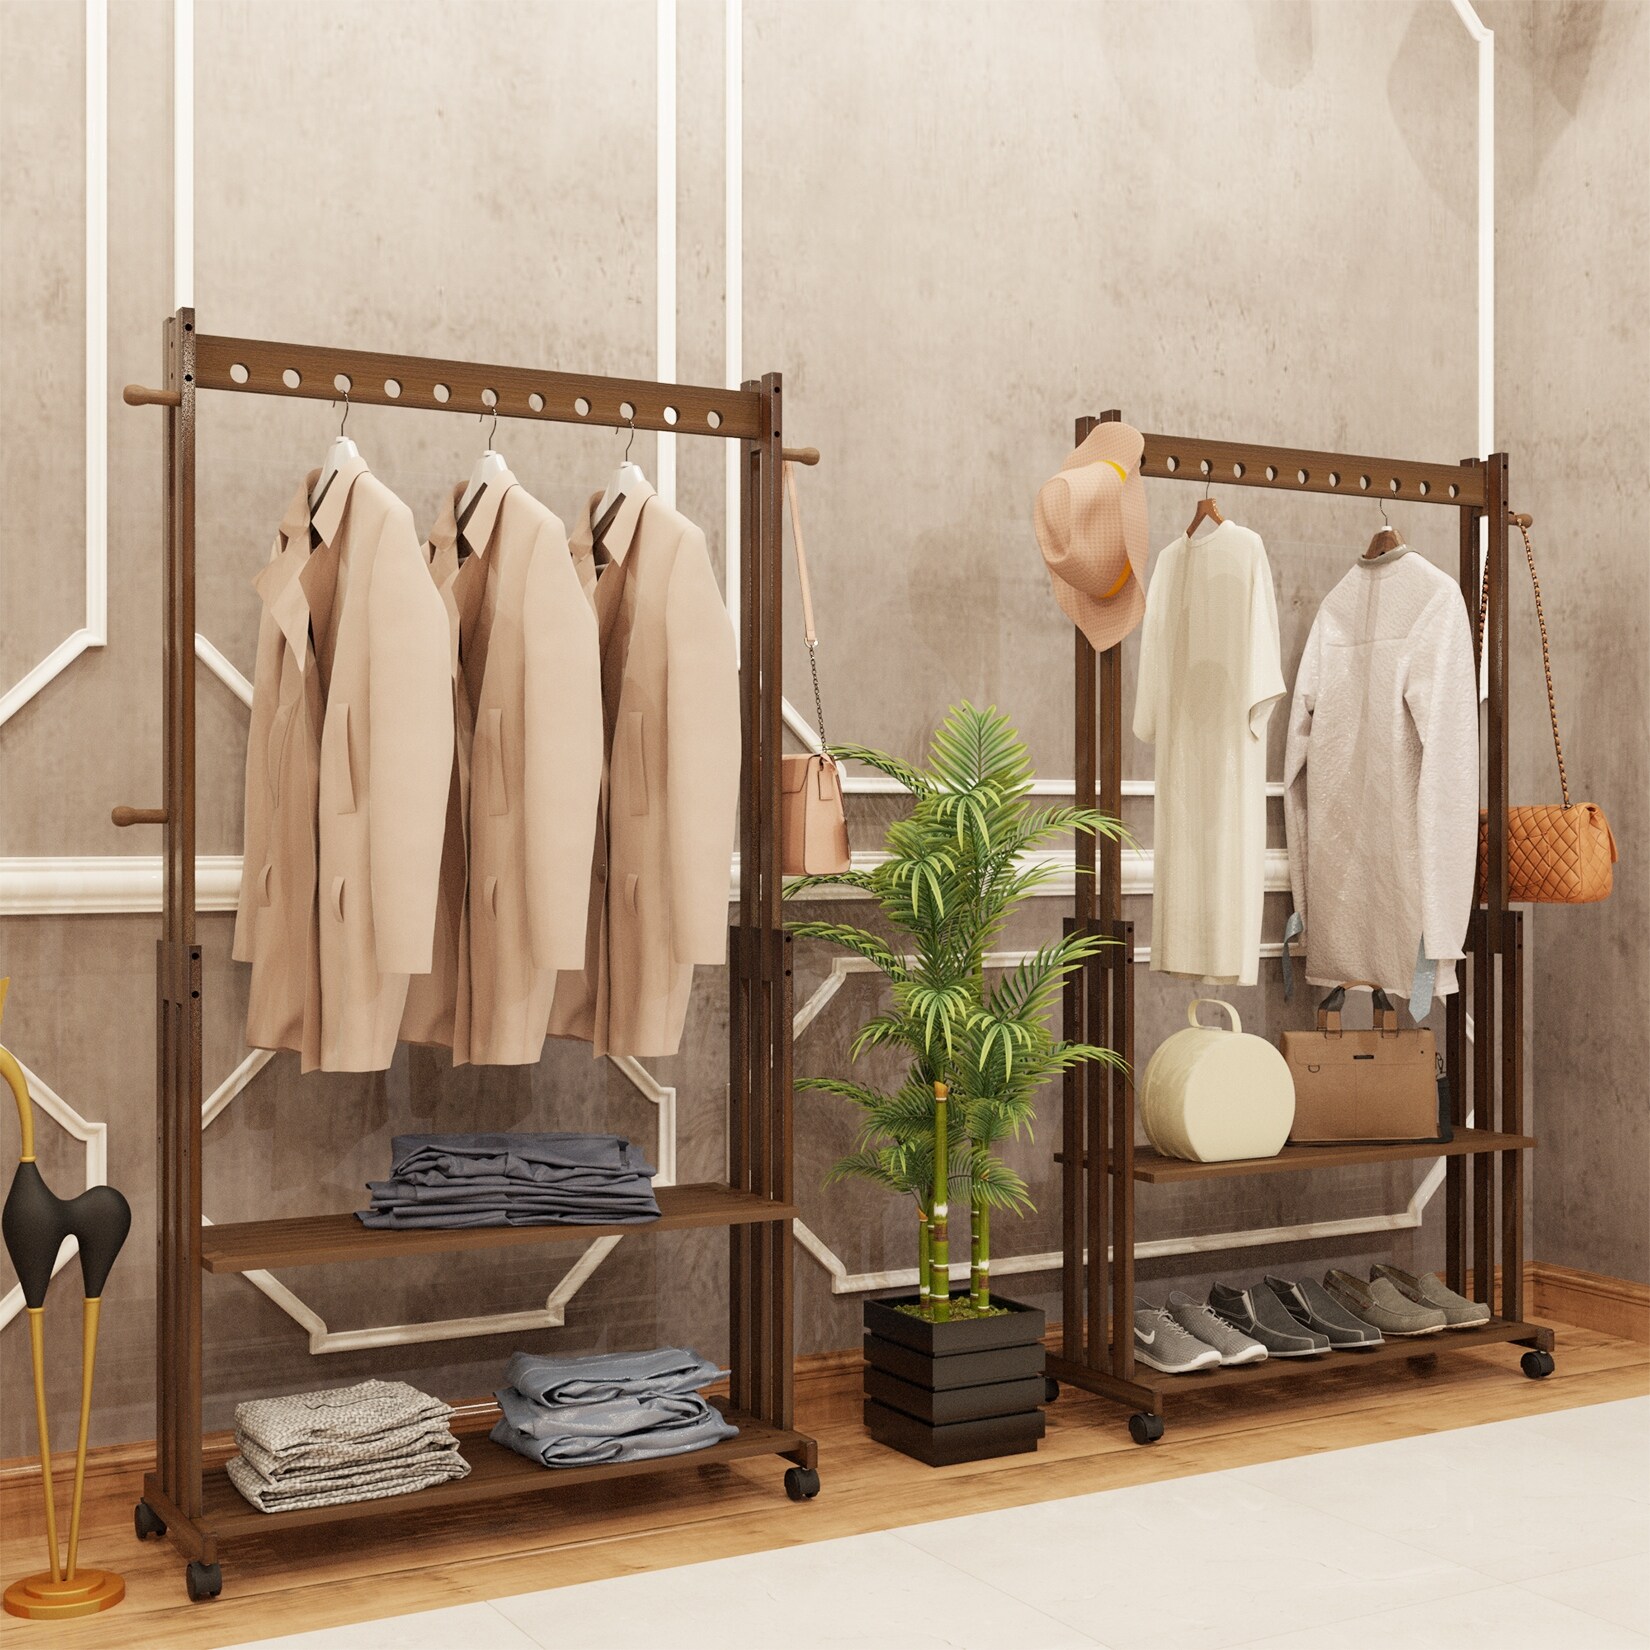 https://ak1.ostkcdn.com/images/products/is/images/direct/da51e1e56b1feacb61c7c04c3f4a018030a69092/Rustic-Wooden-Clothes-Rack-Freestanding-Bamboo-Garment-Stand-On-Wheels.jpg